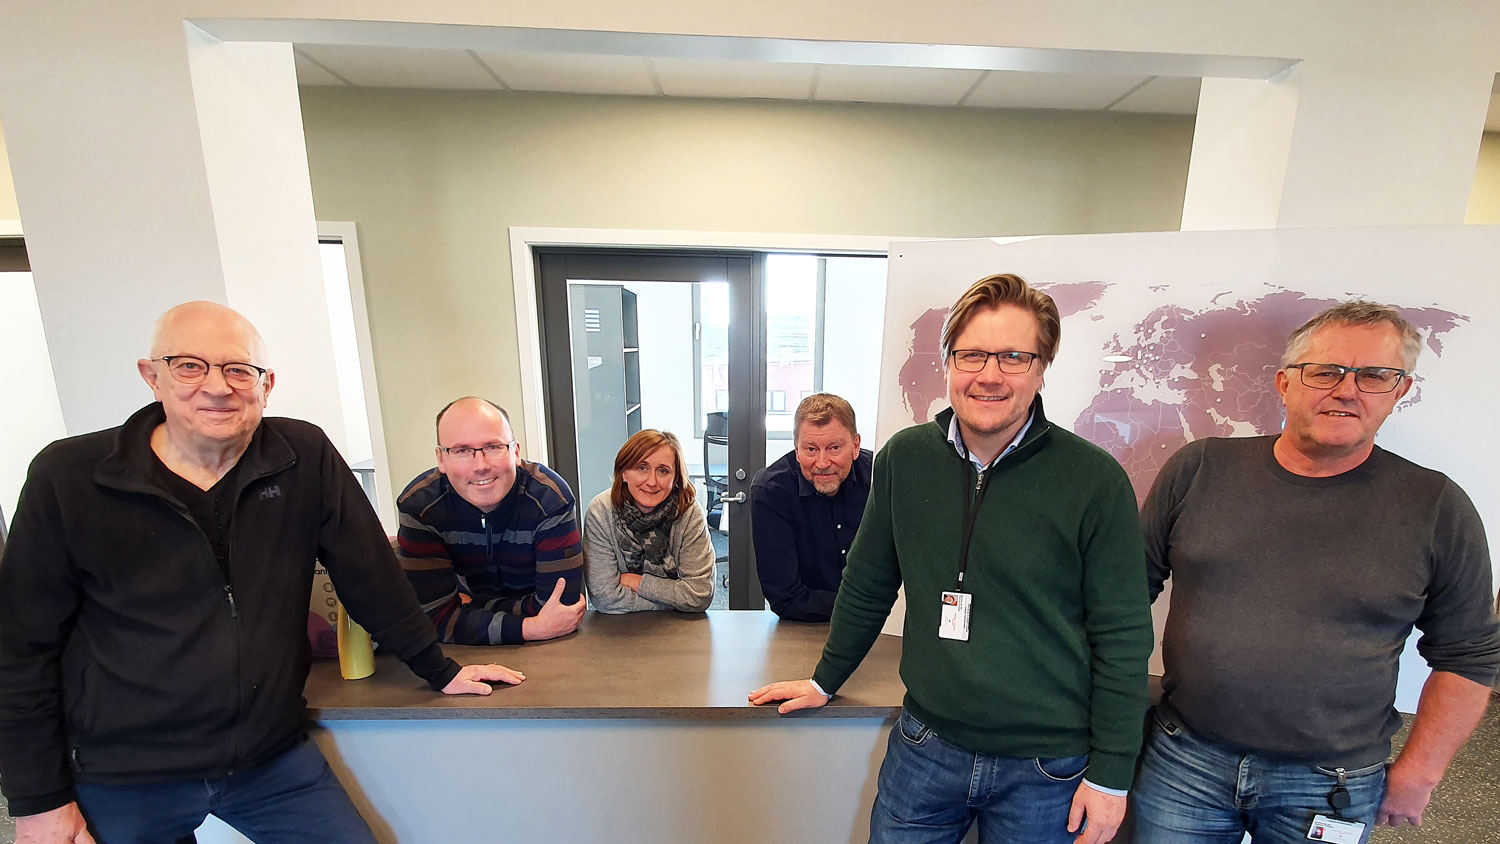 The Strukturas team of six persons in new office facilities at Herøya